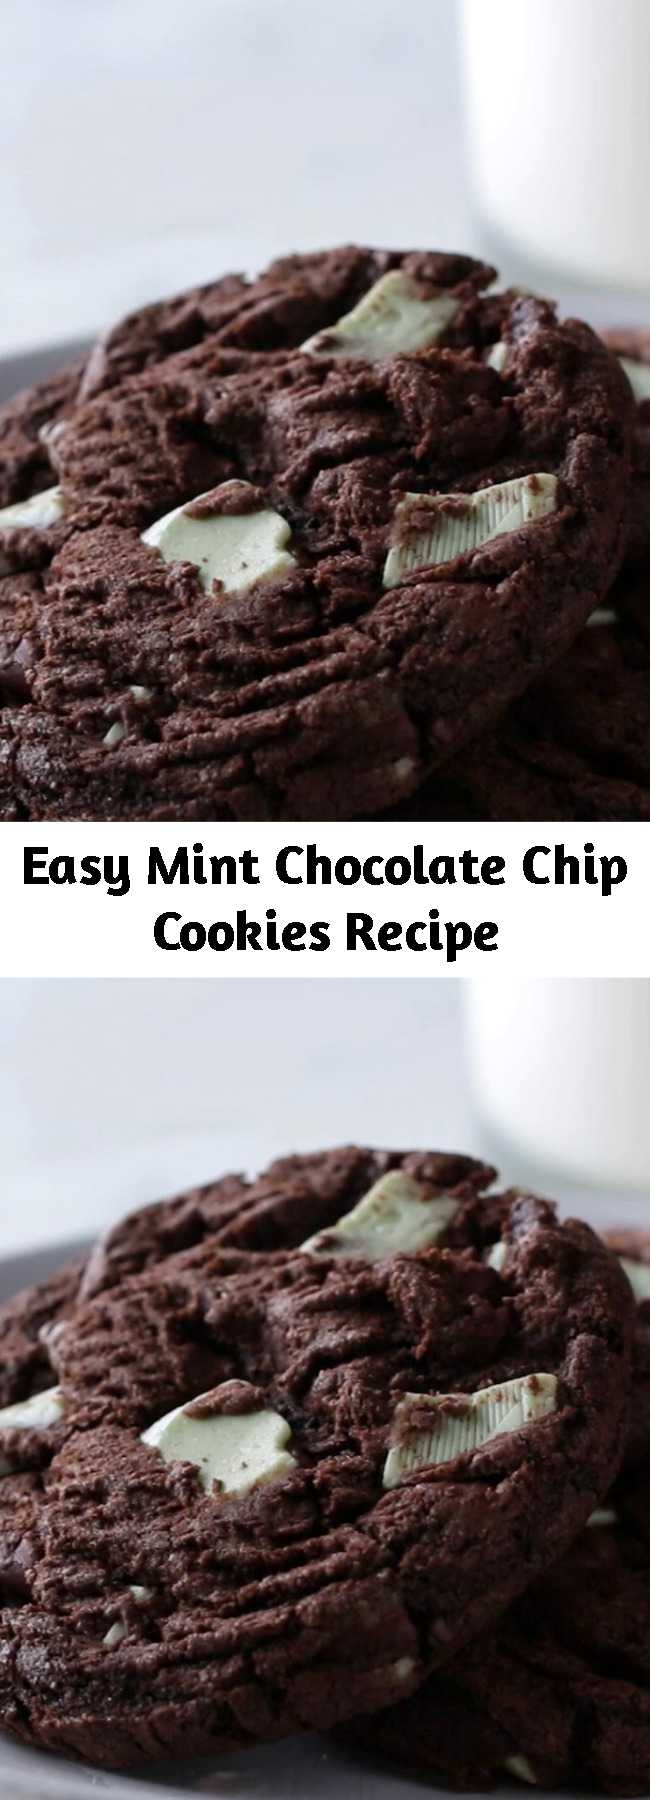 Easy Mint Chocolate Chip Cookies Recipe - Extremely Delicious!! Fun and easy to make too.